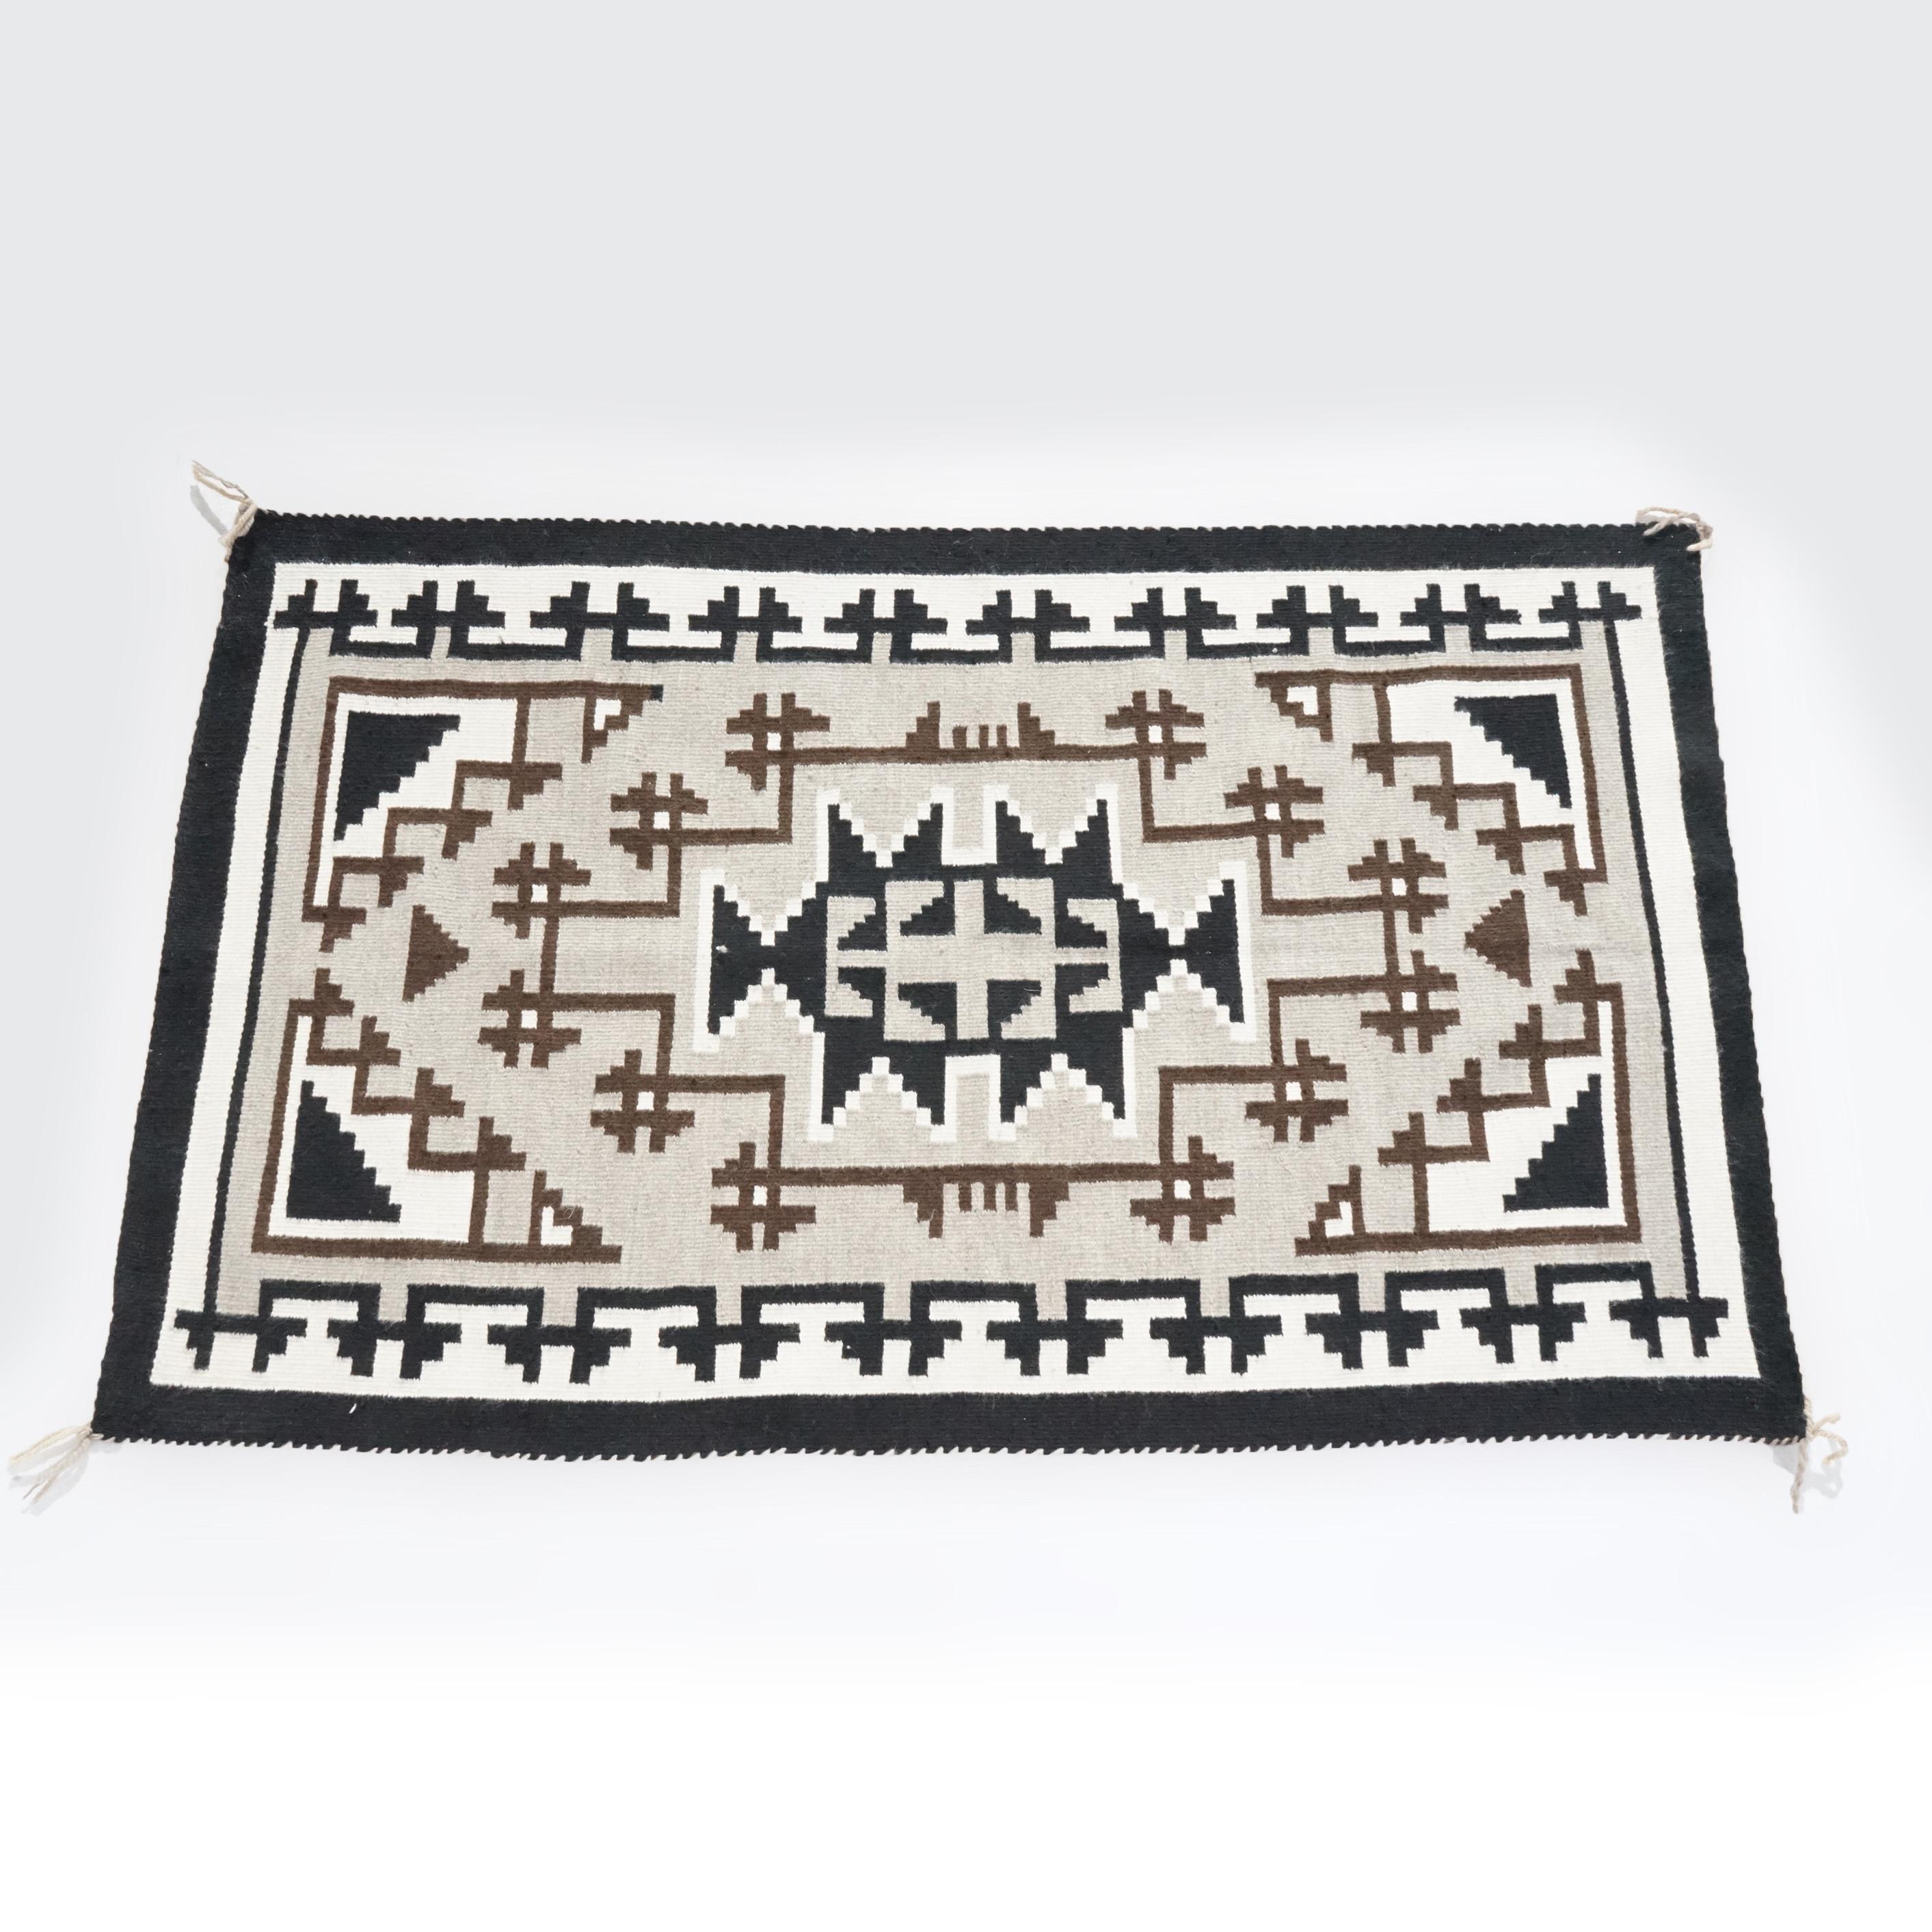 An American Indian Southwestern Navajo style rug offers wool construction with central medallion and geometric elements, 20th century.

Measures - 49.5